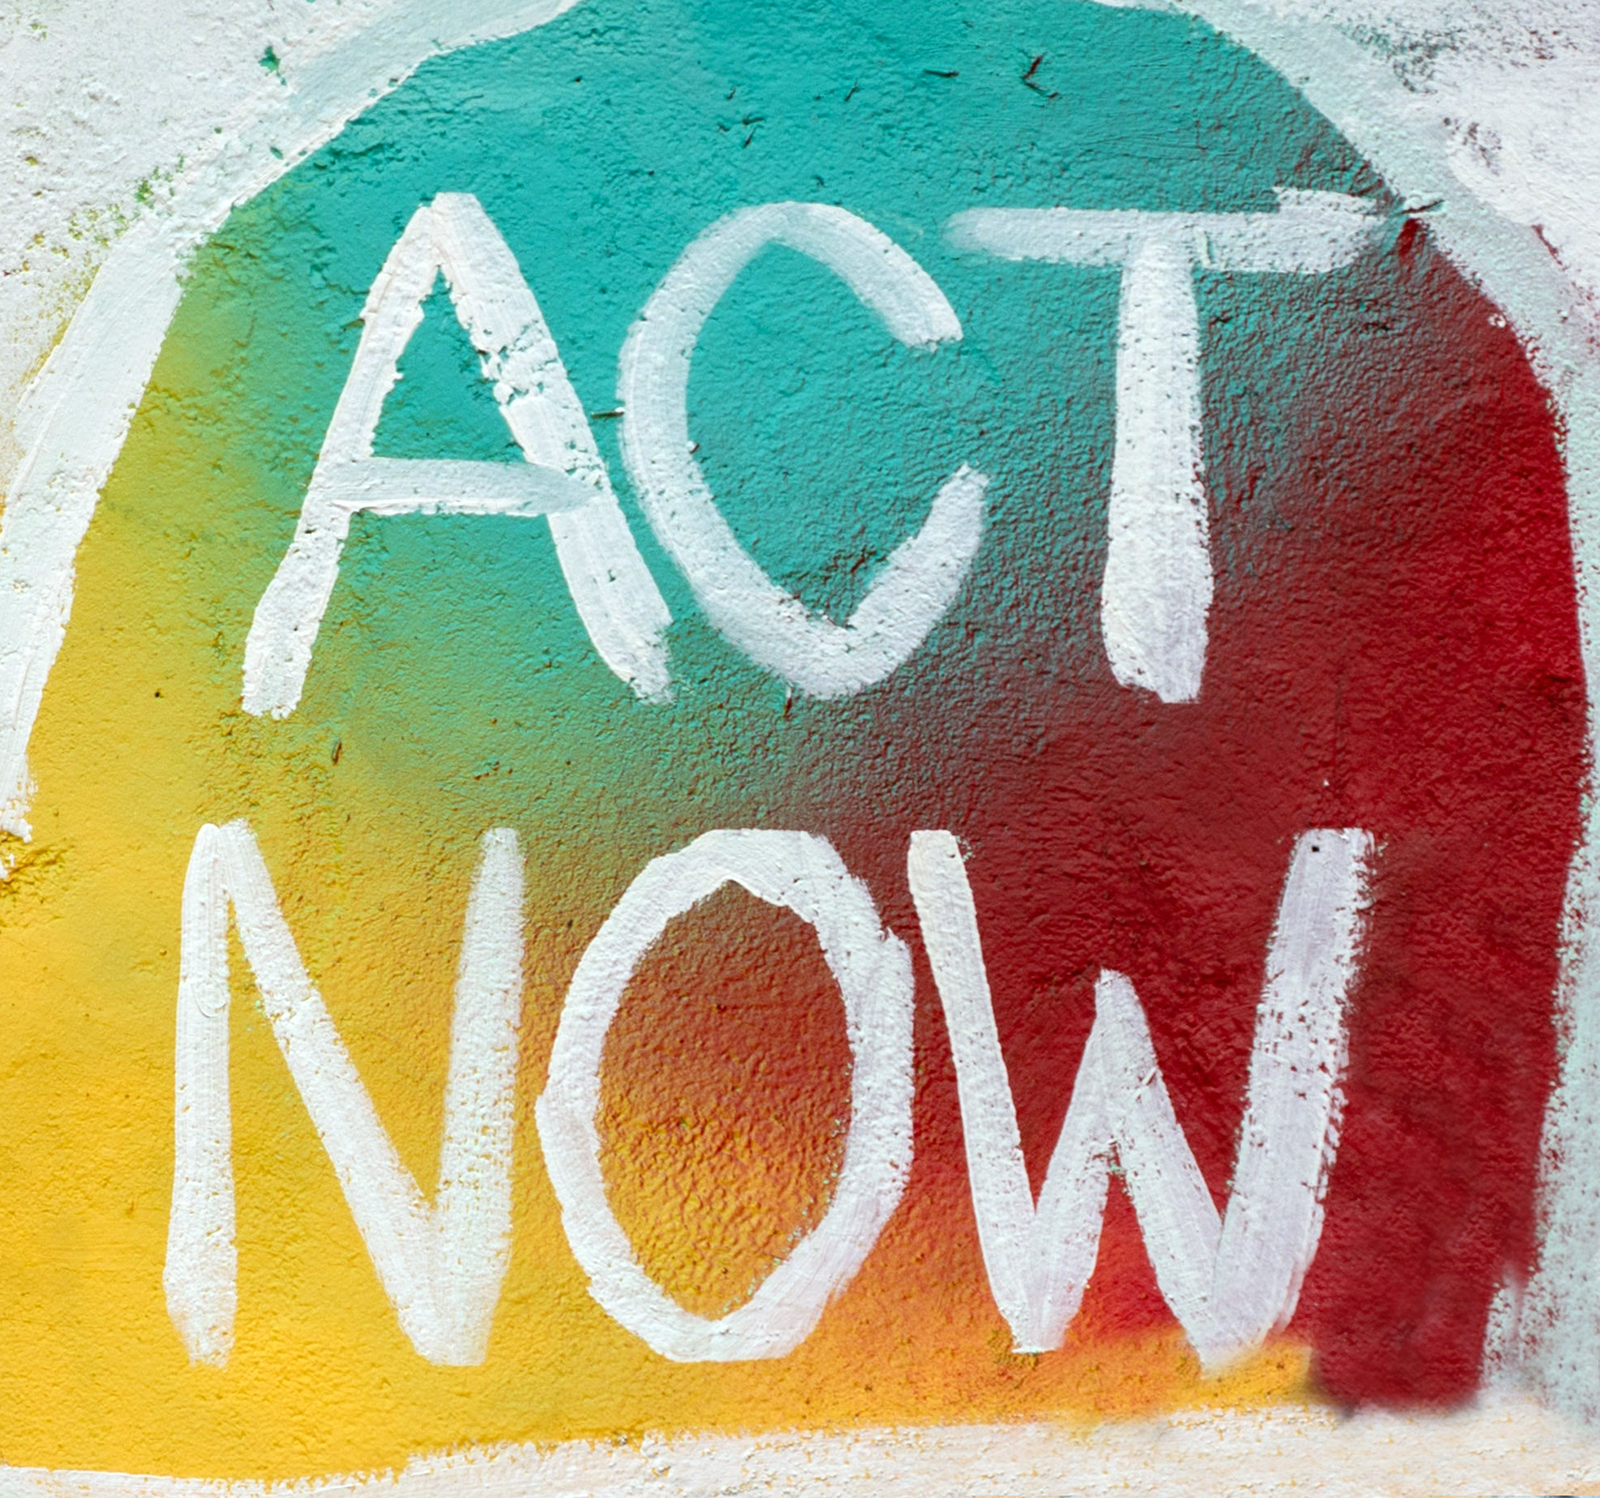 Sign of colorful mural with white text that says Act Now